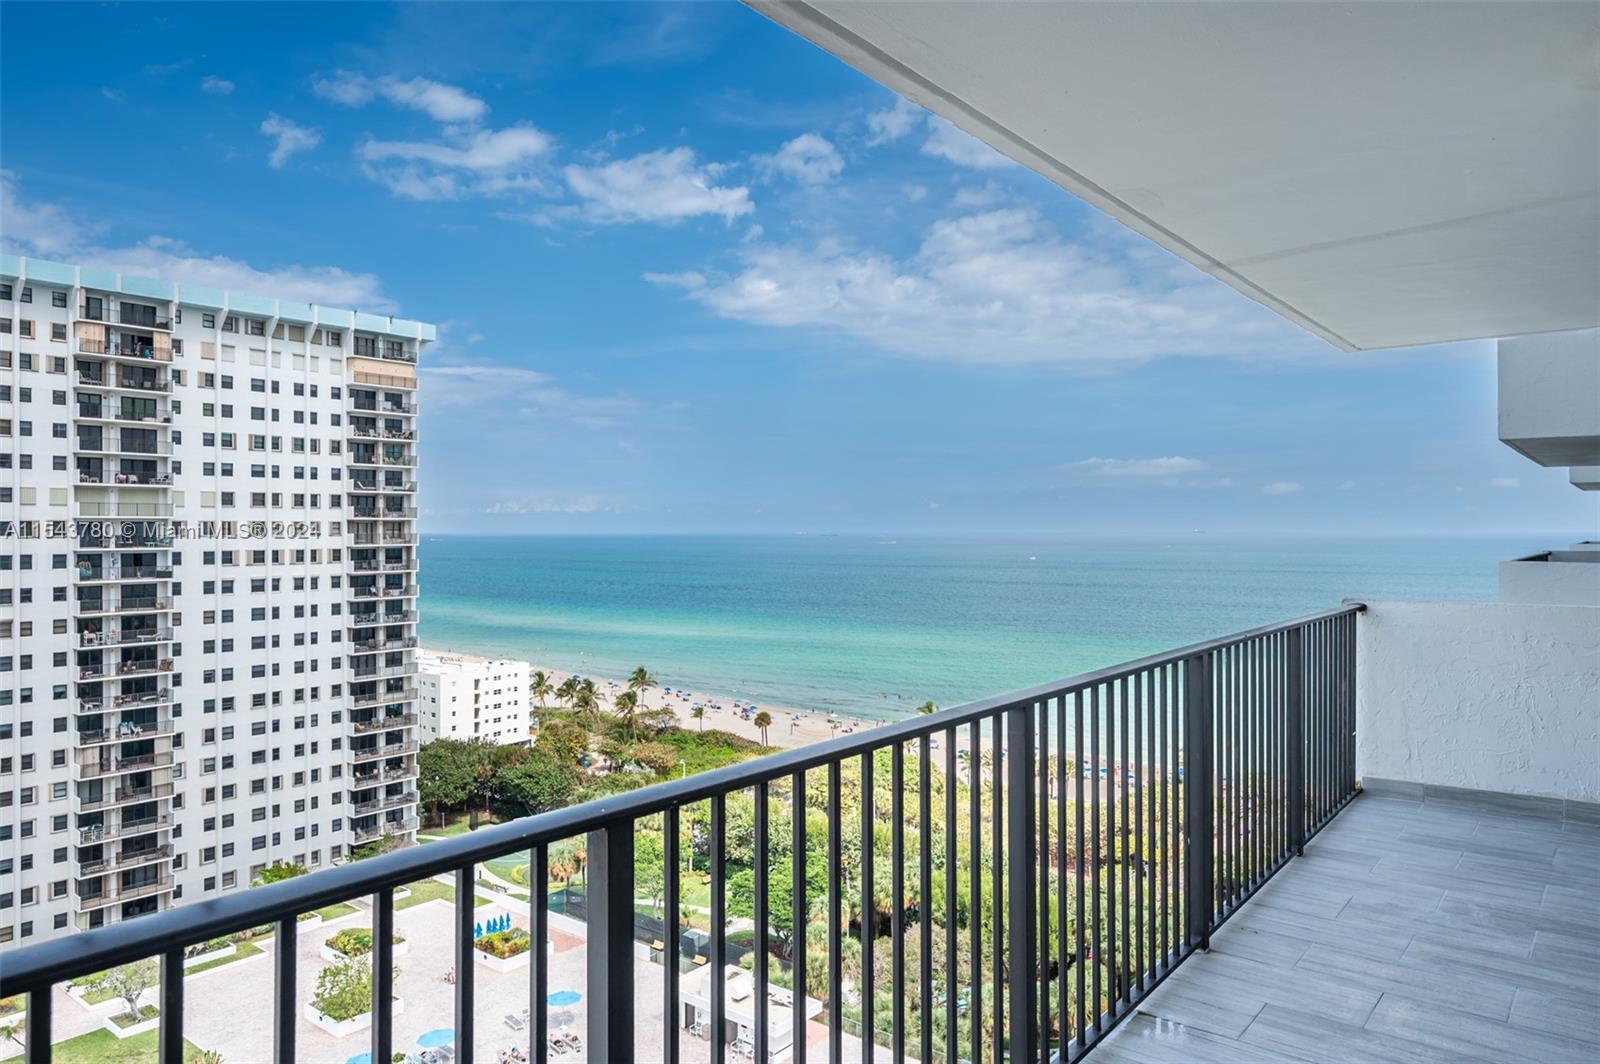 Photo of 1201 S Ocean Dr #1807S in Hollywood, FL